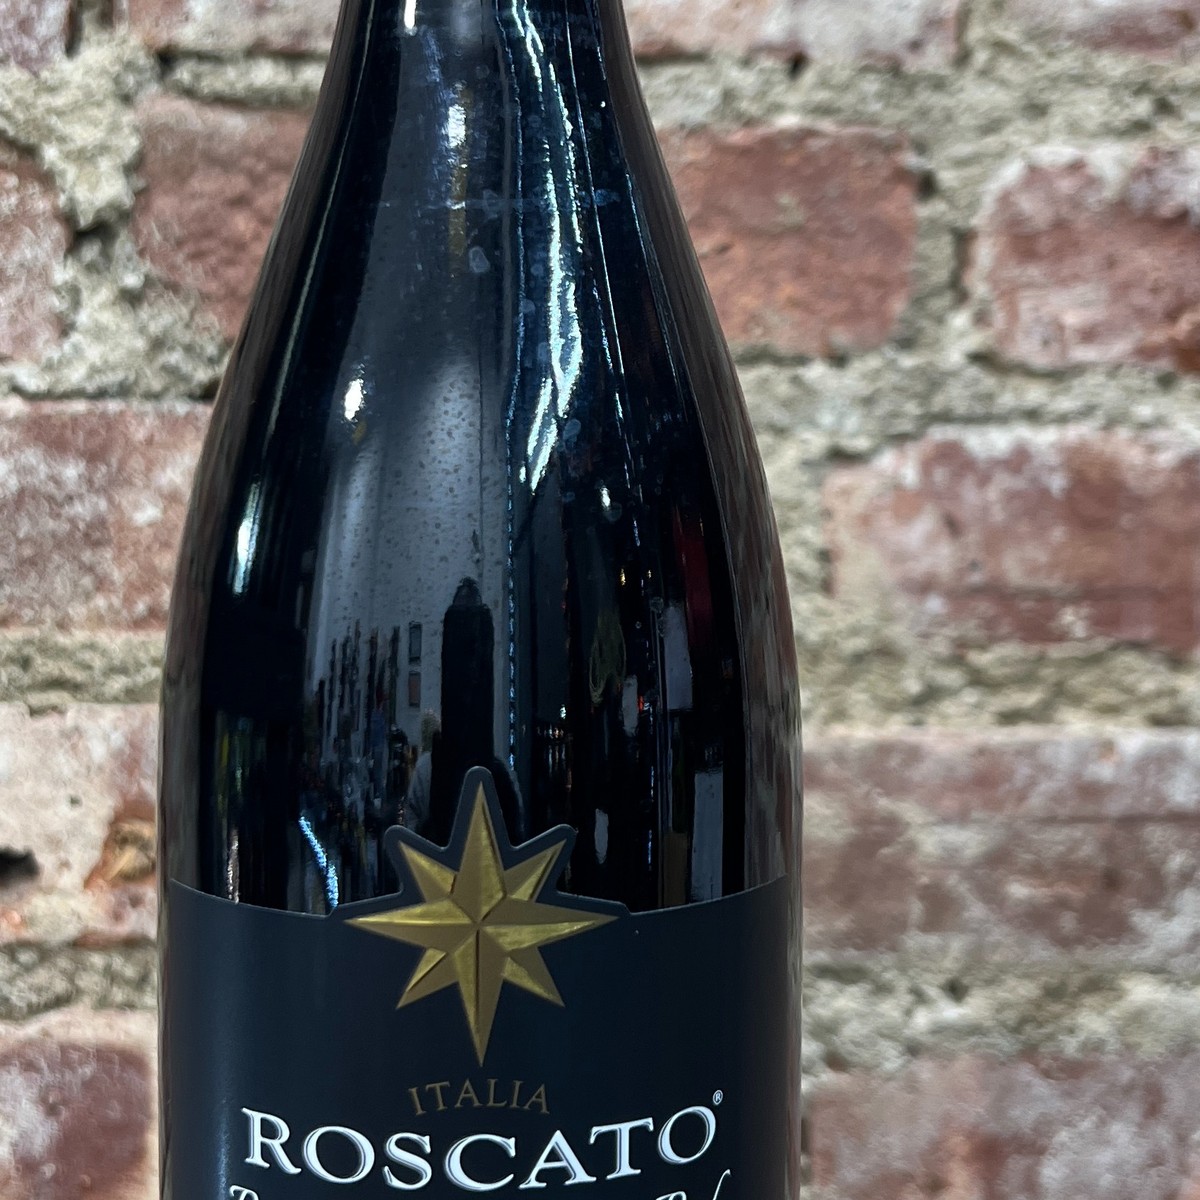 Roscato Rosso Dolce 750ml Single Glass Bottle Red Wine